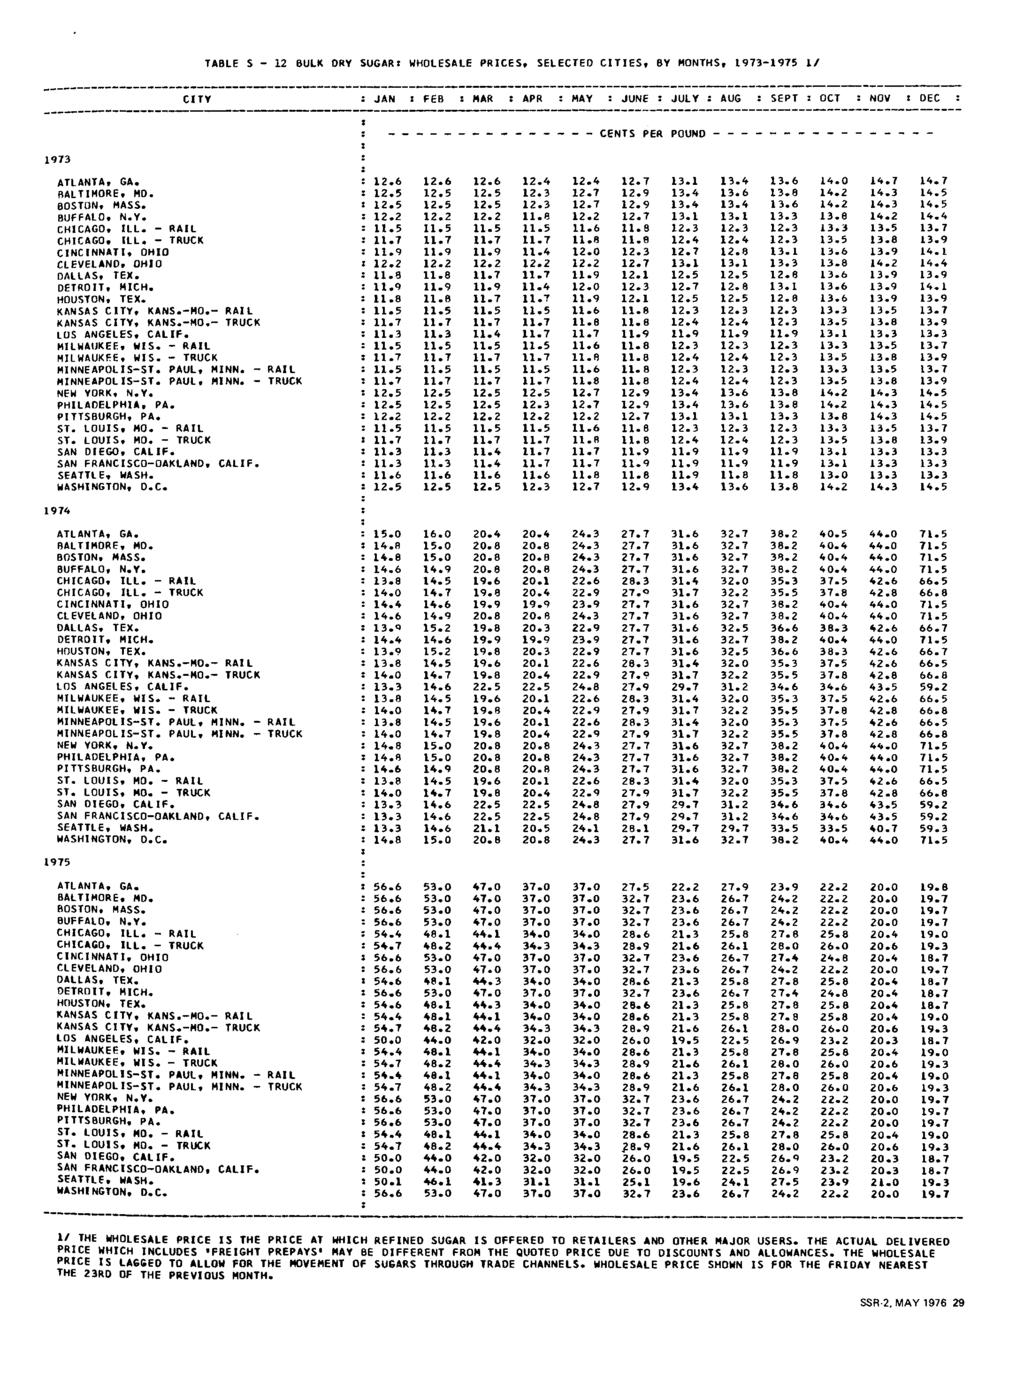 TABLE S - 12 BULK DRY SUGAR: WHOLESALE PRICES, SELECTED CITIES, BY MONTHS, 1973-1975 1/